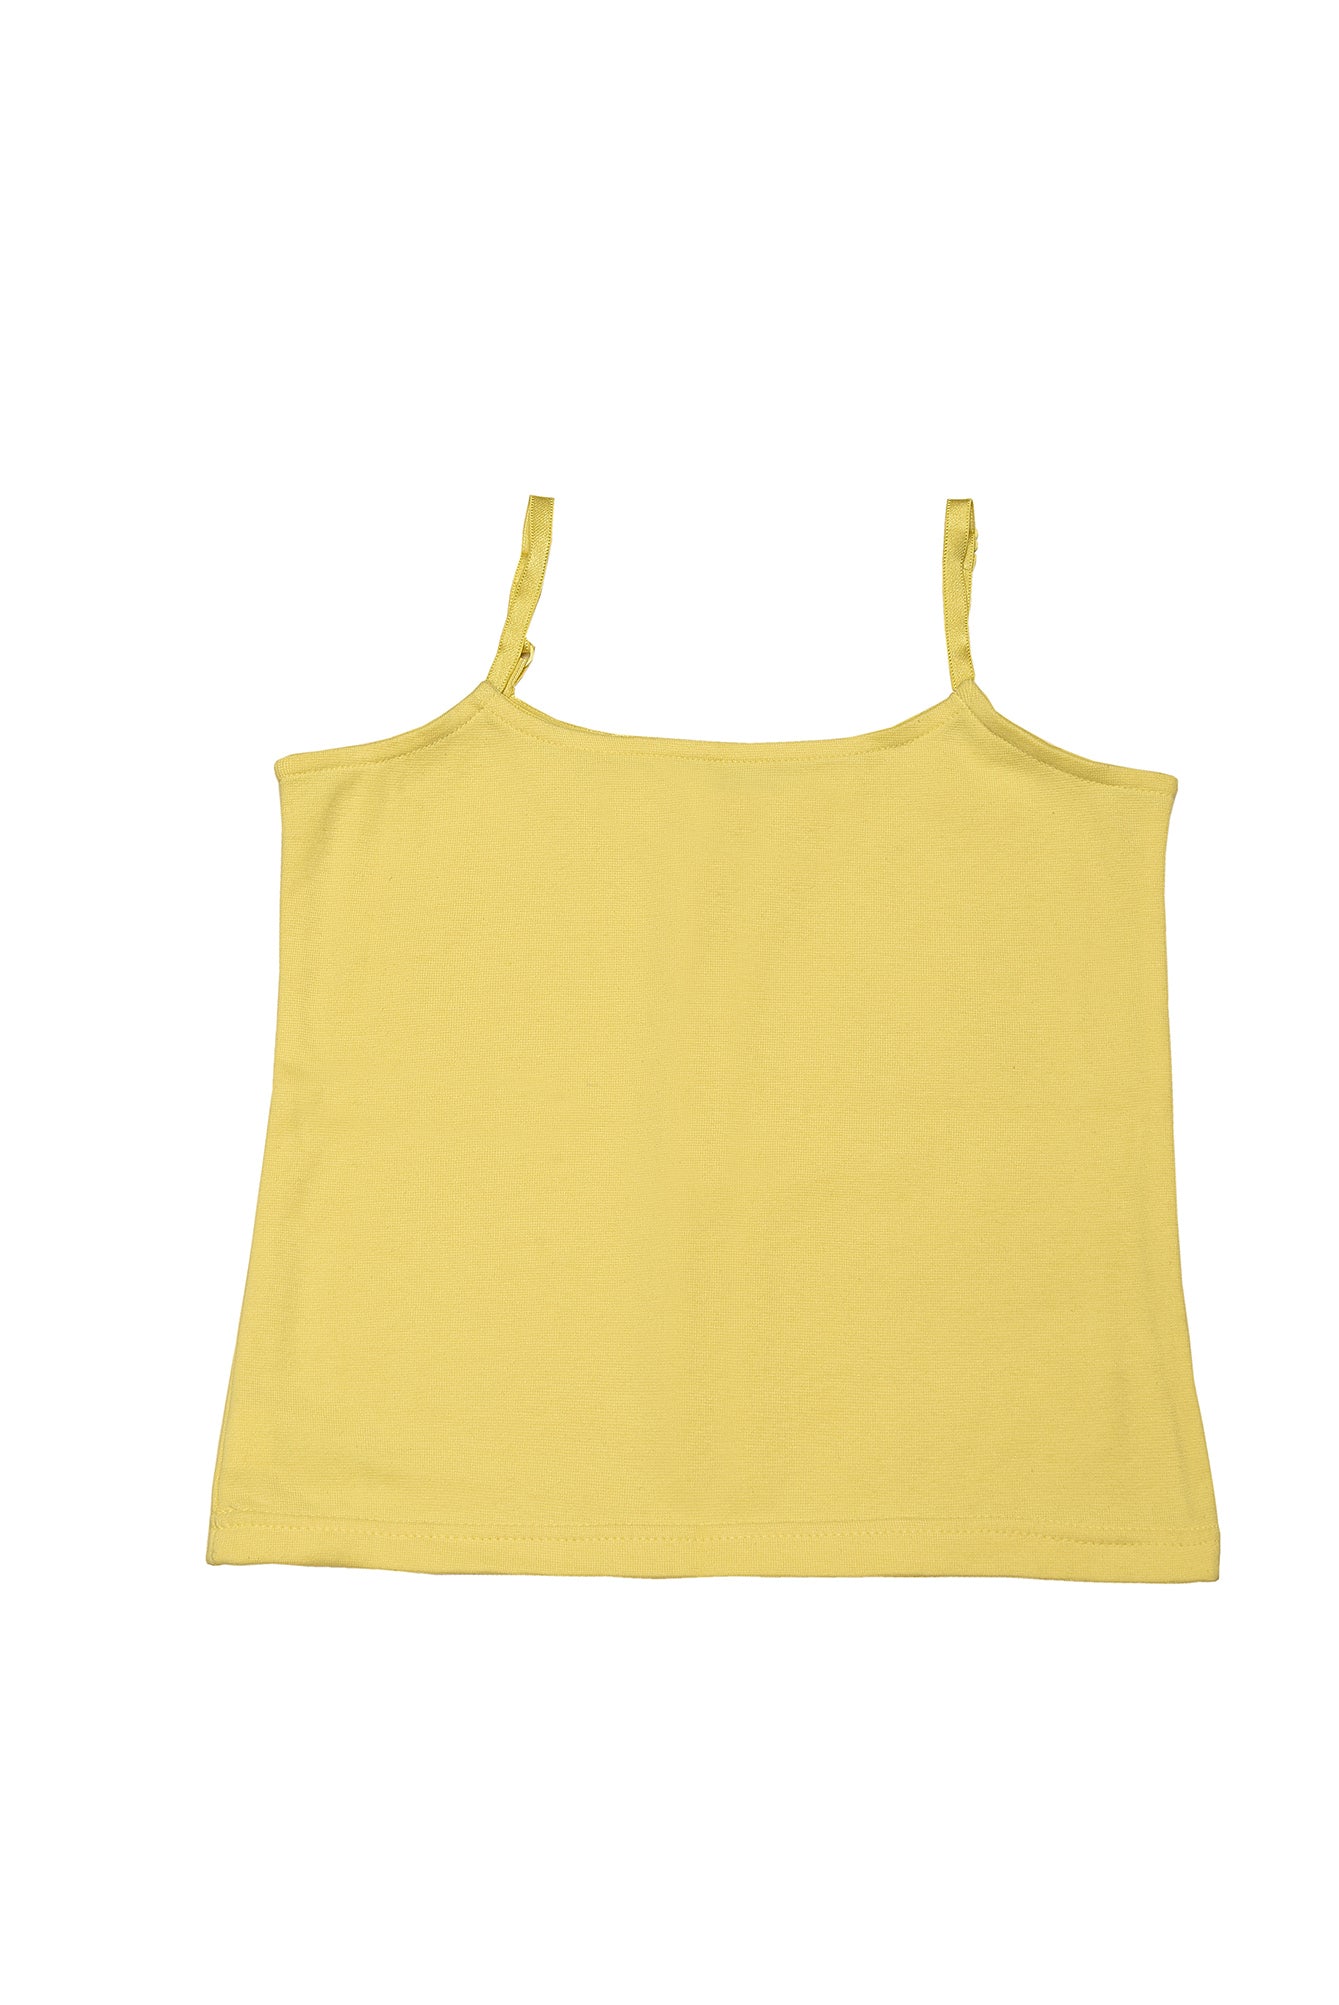 KDS-GC-13062 CAMISOLE YELLOW